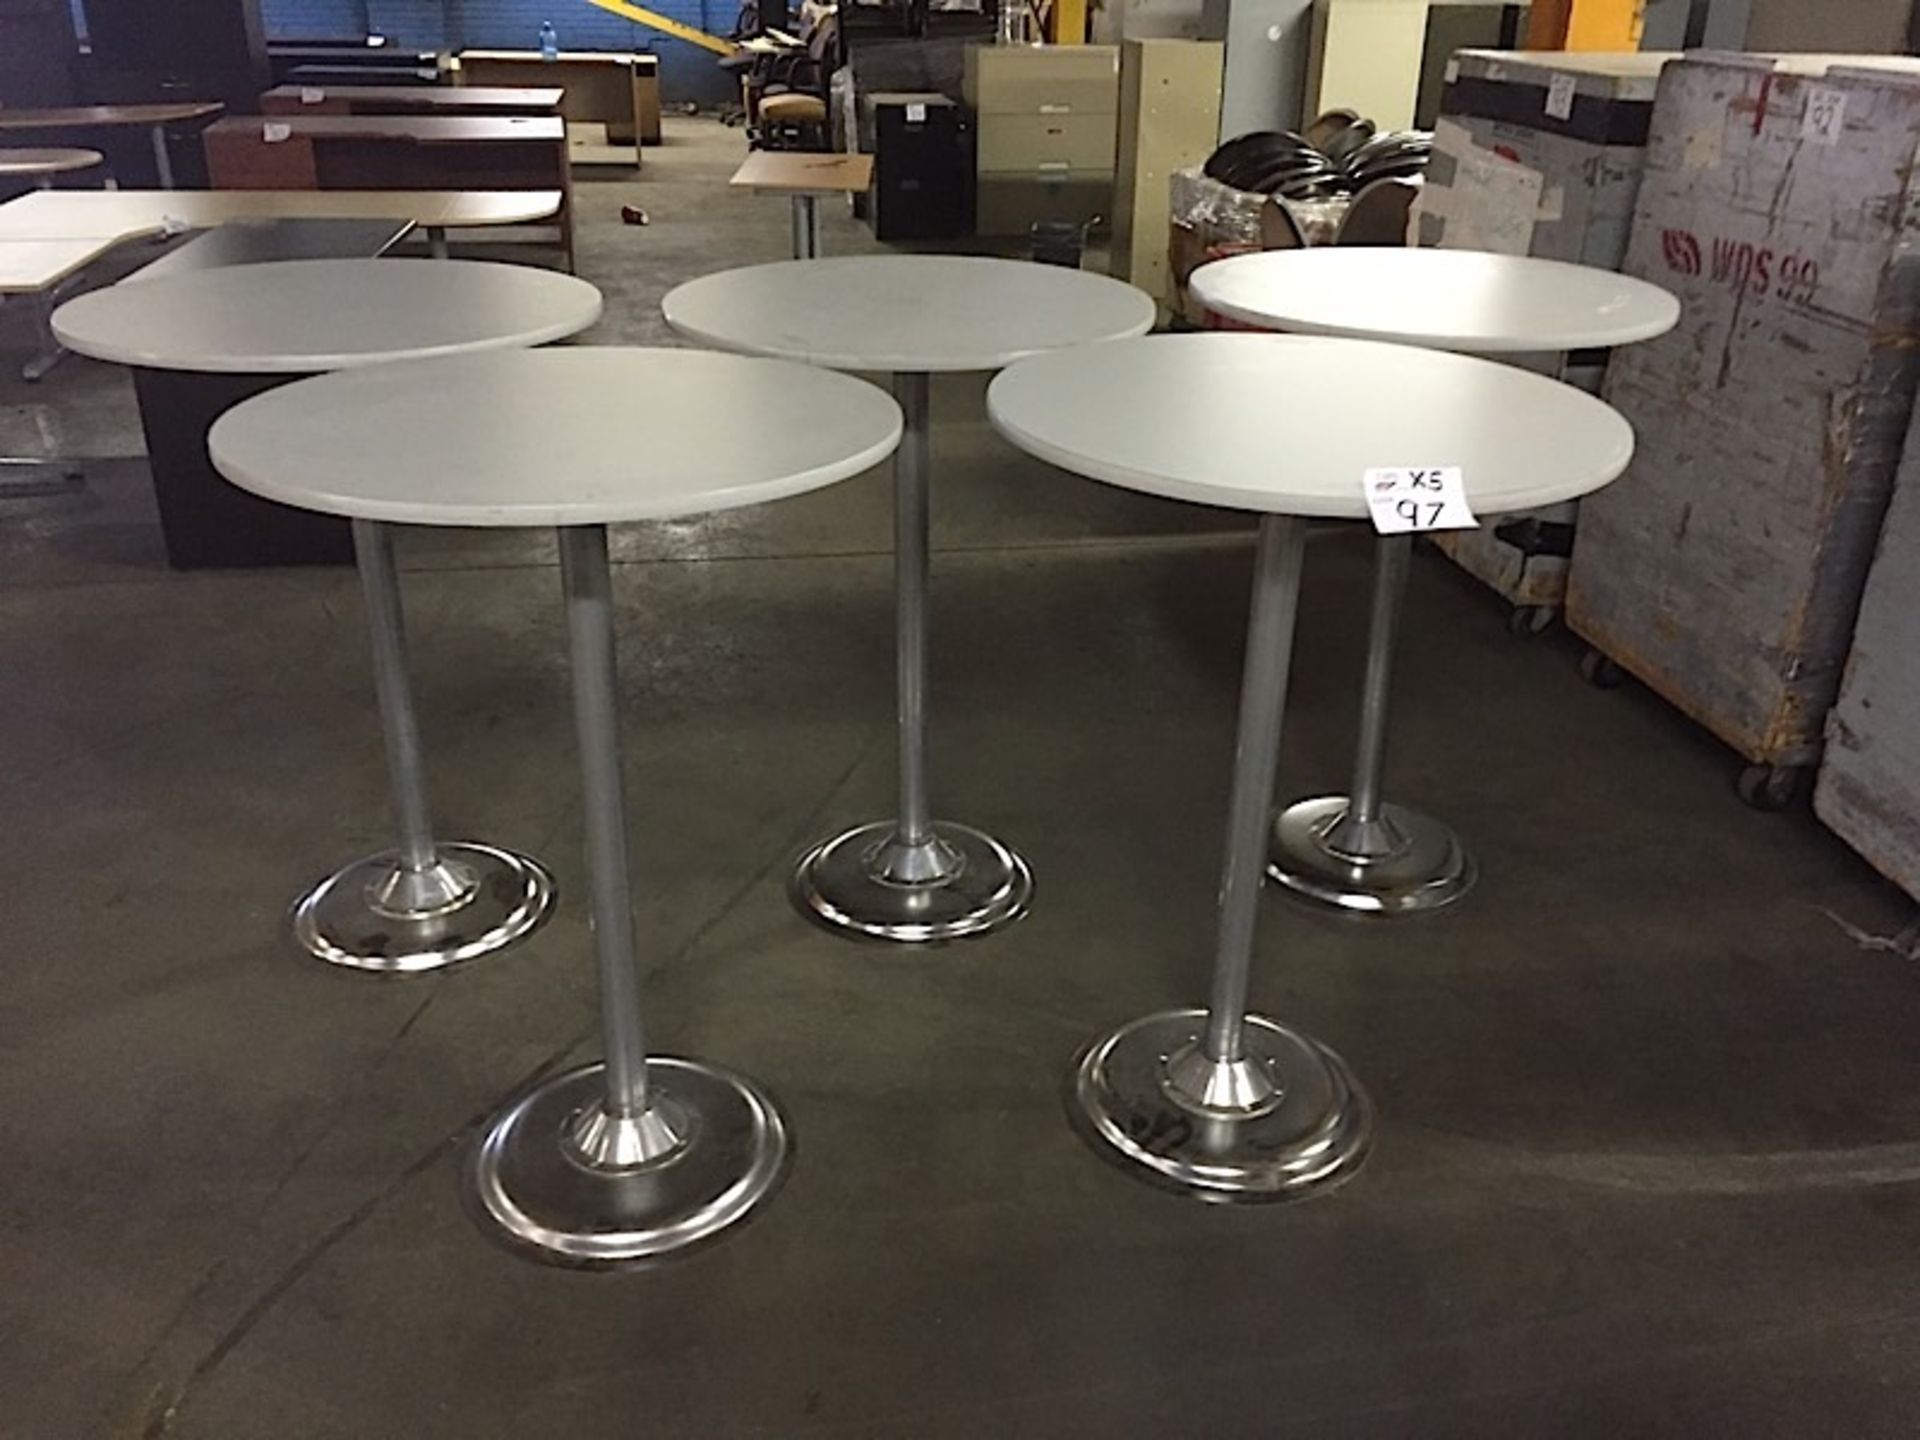 TRADE SHOW TABLES (THEY BREAK DOWN INTO 3 PIECES EASILY) (BIDDING PER TABLE, MULTIPLIED BY